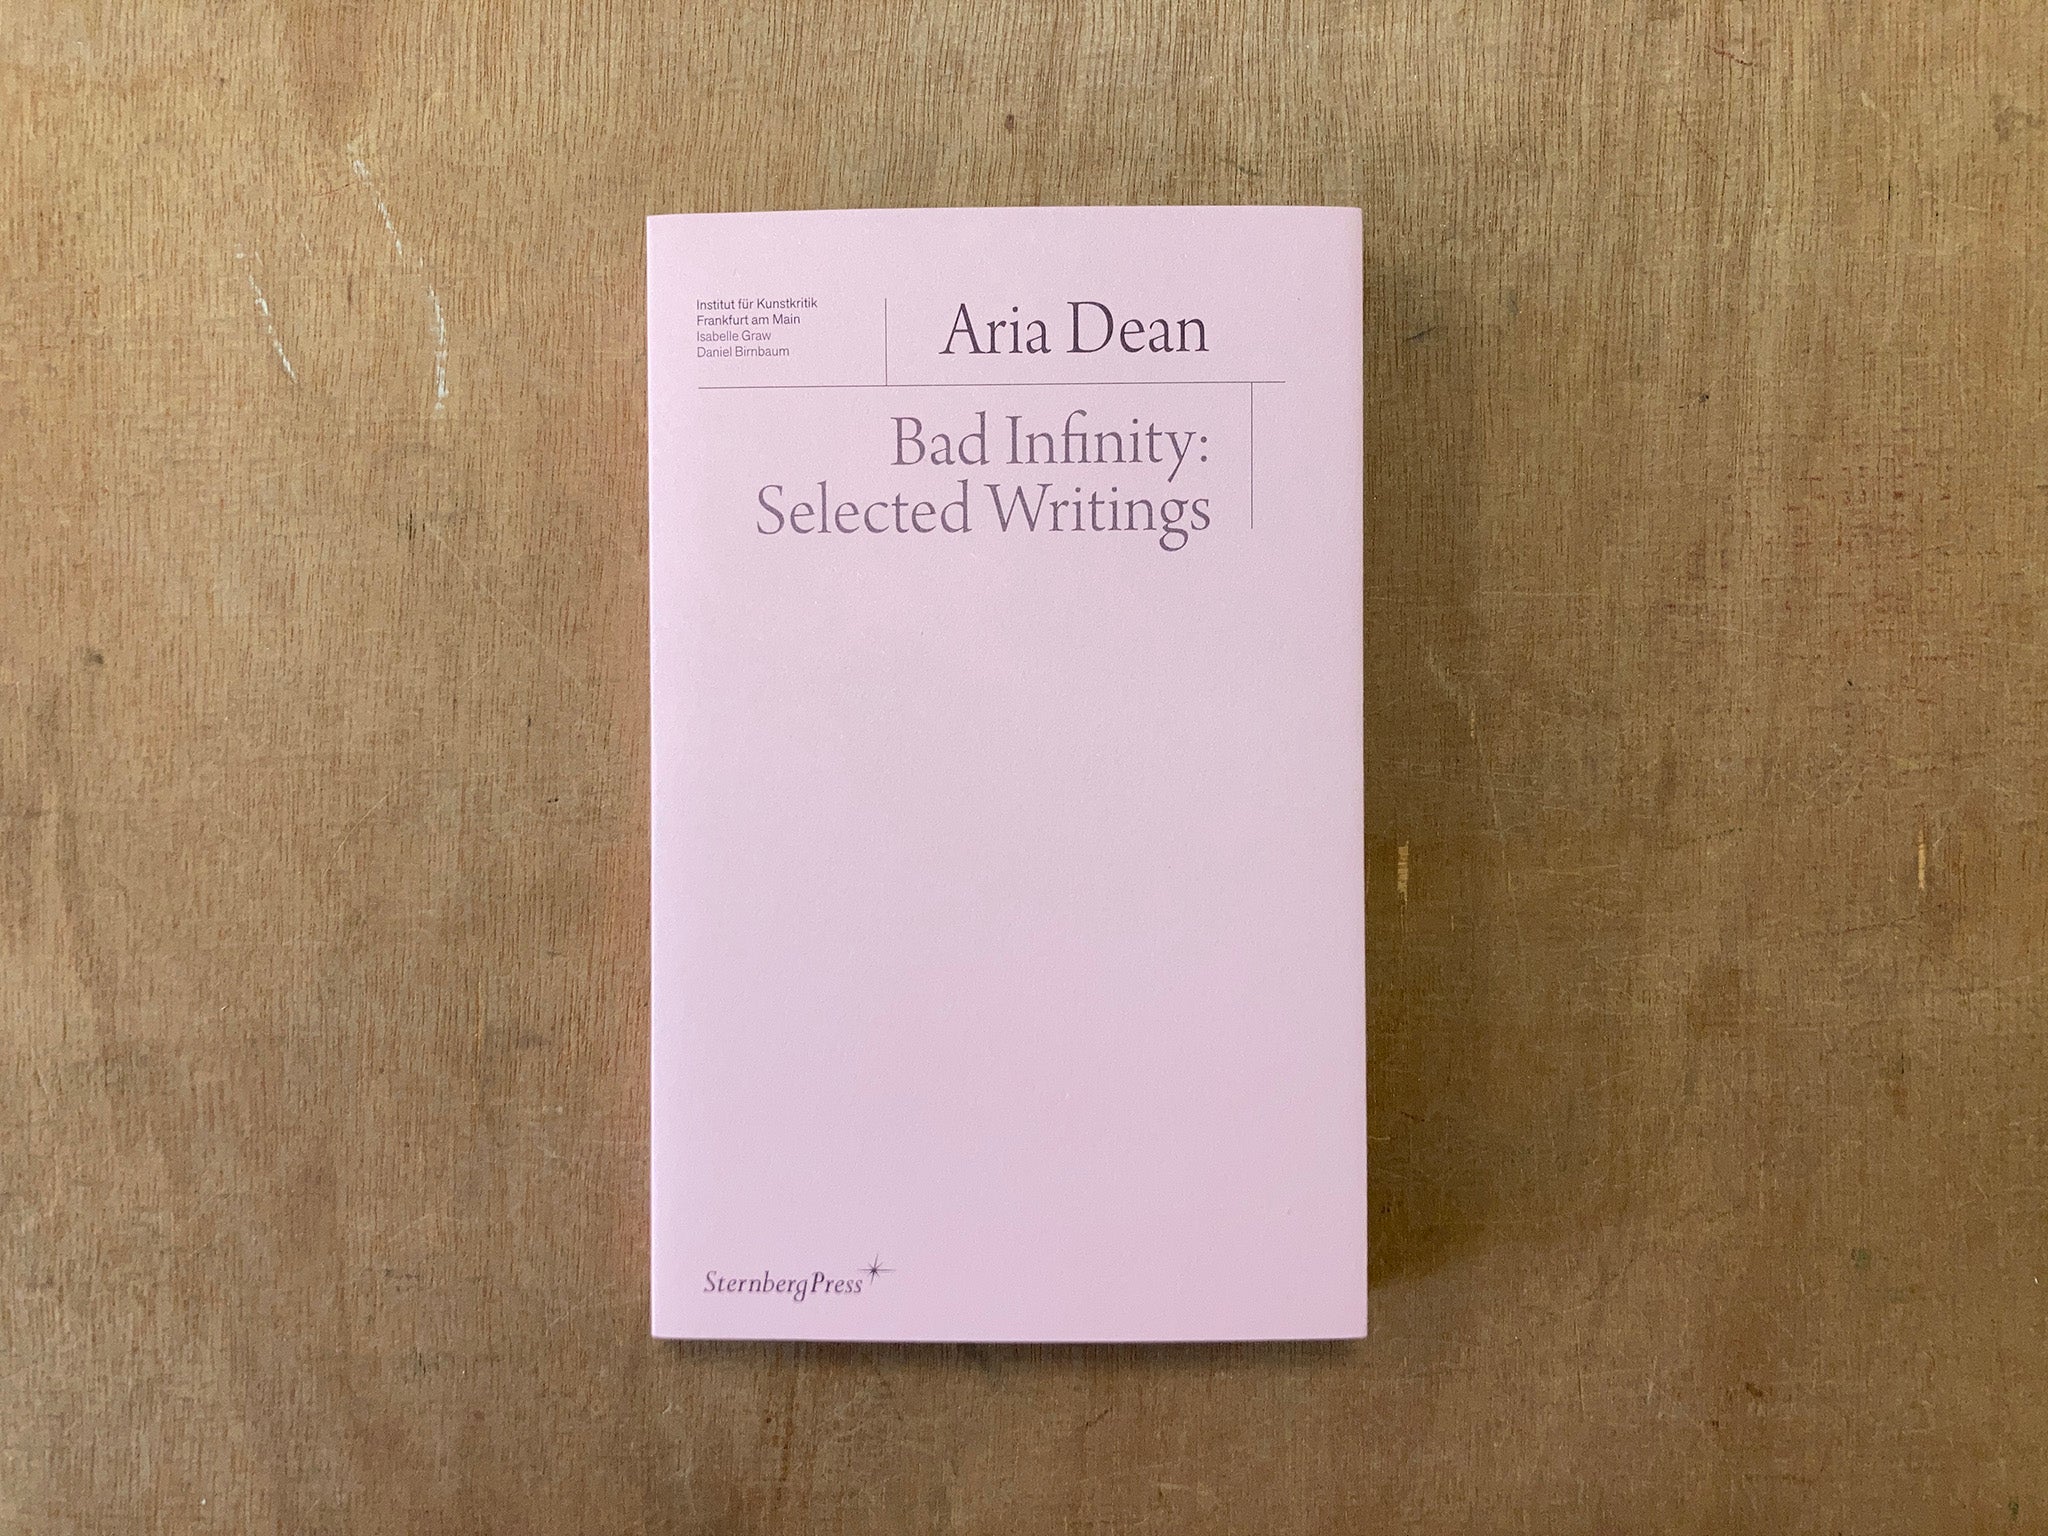 BAD INFINITY: SELECTED WRITINGS by Aria Dean